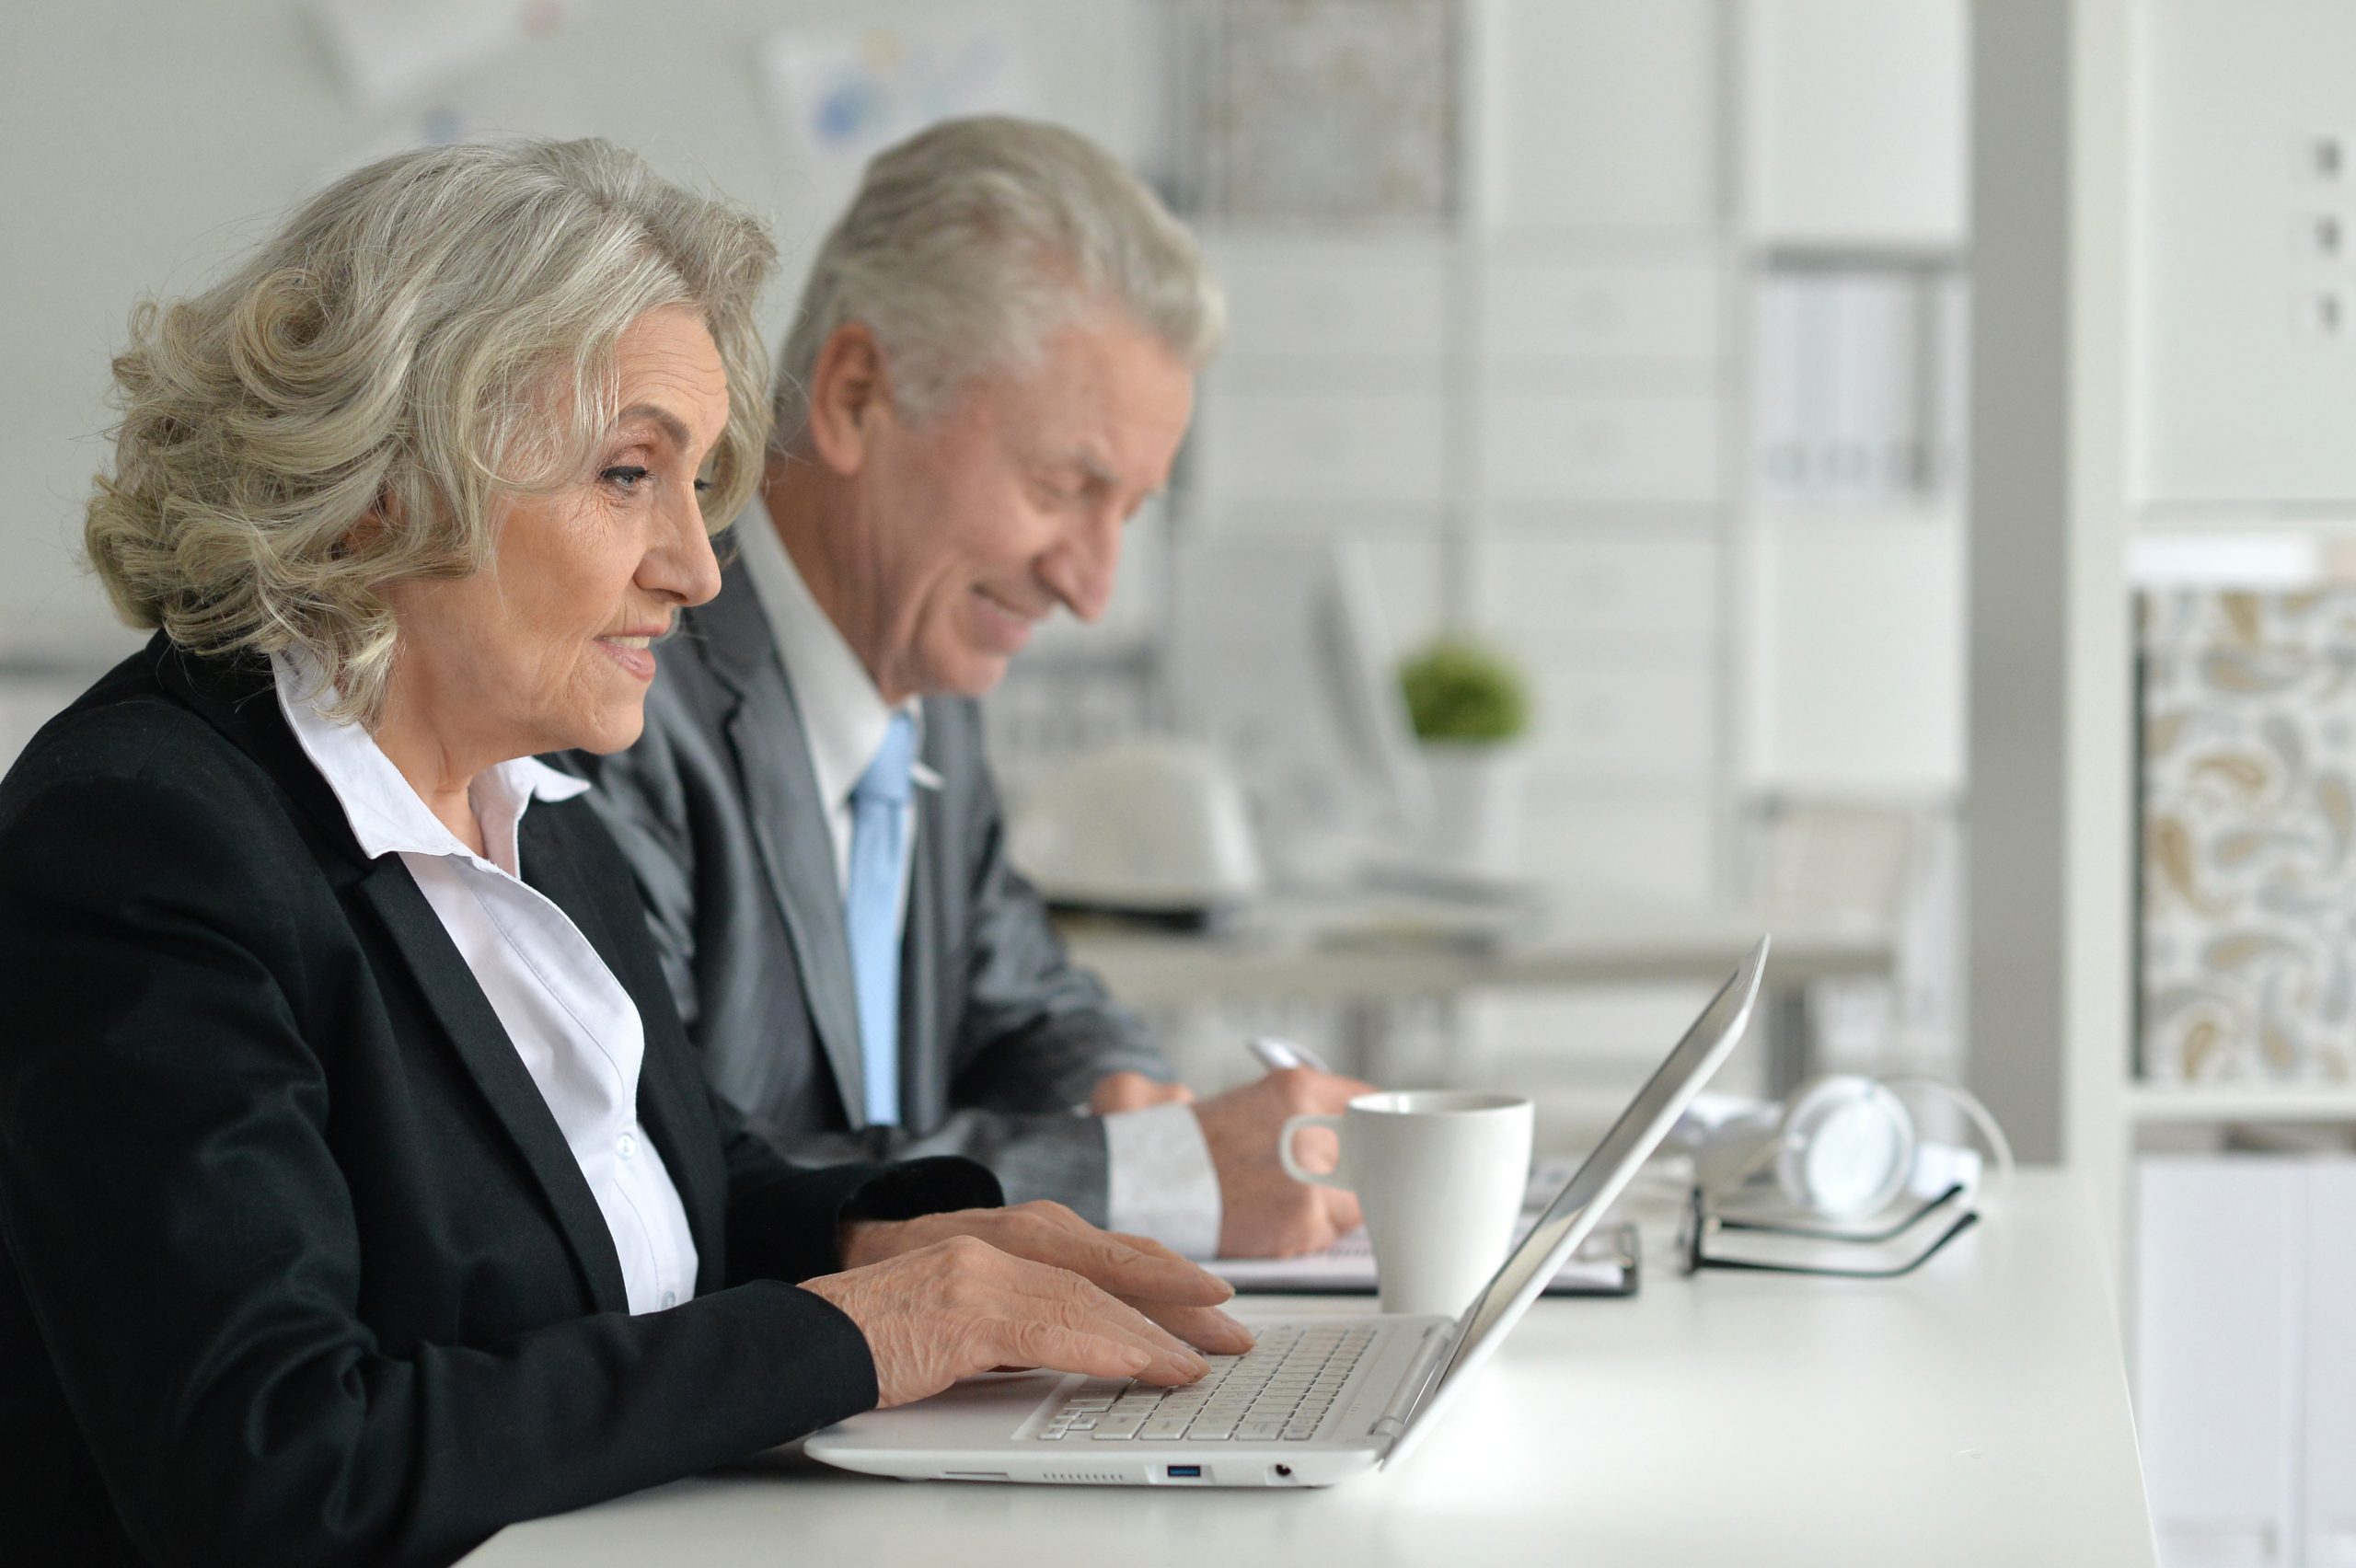 Older business man and woman on laptop, supporting older workers